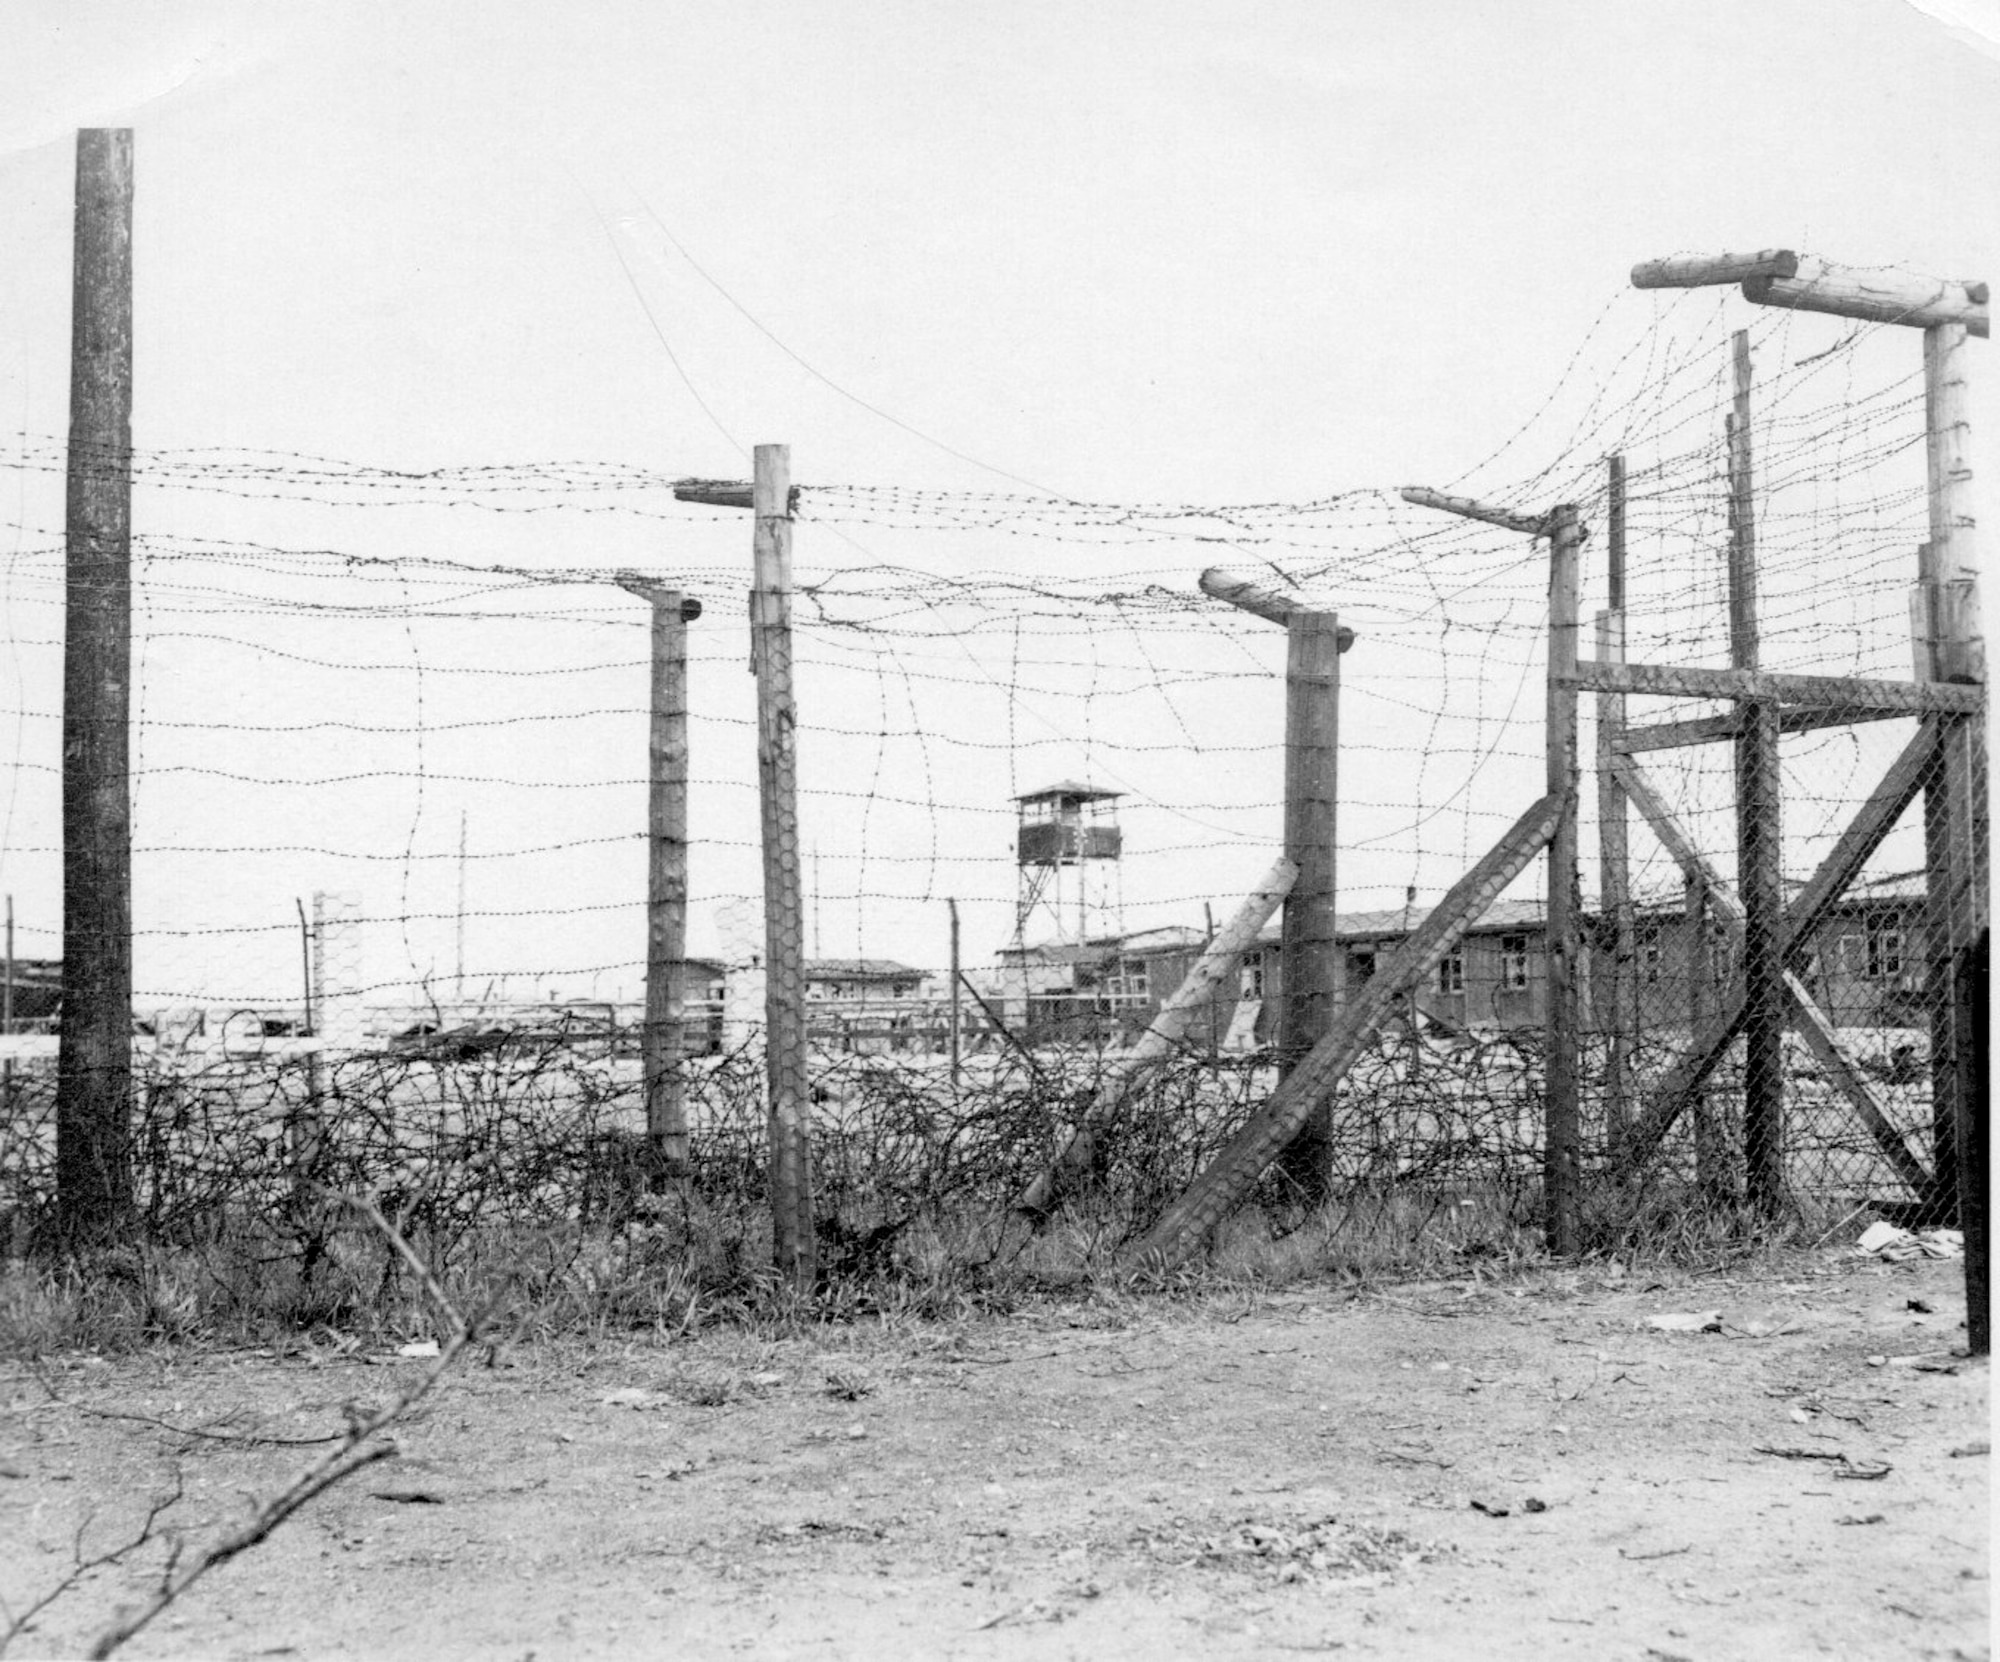 Unidentified prison compound in Germany, 1945 (Courtesy Ms. Nancy Beaumier, daughter of 371FG veteran Sgt. Tom Boliaris)